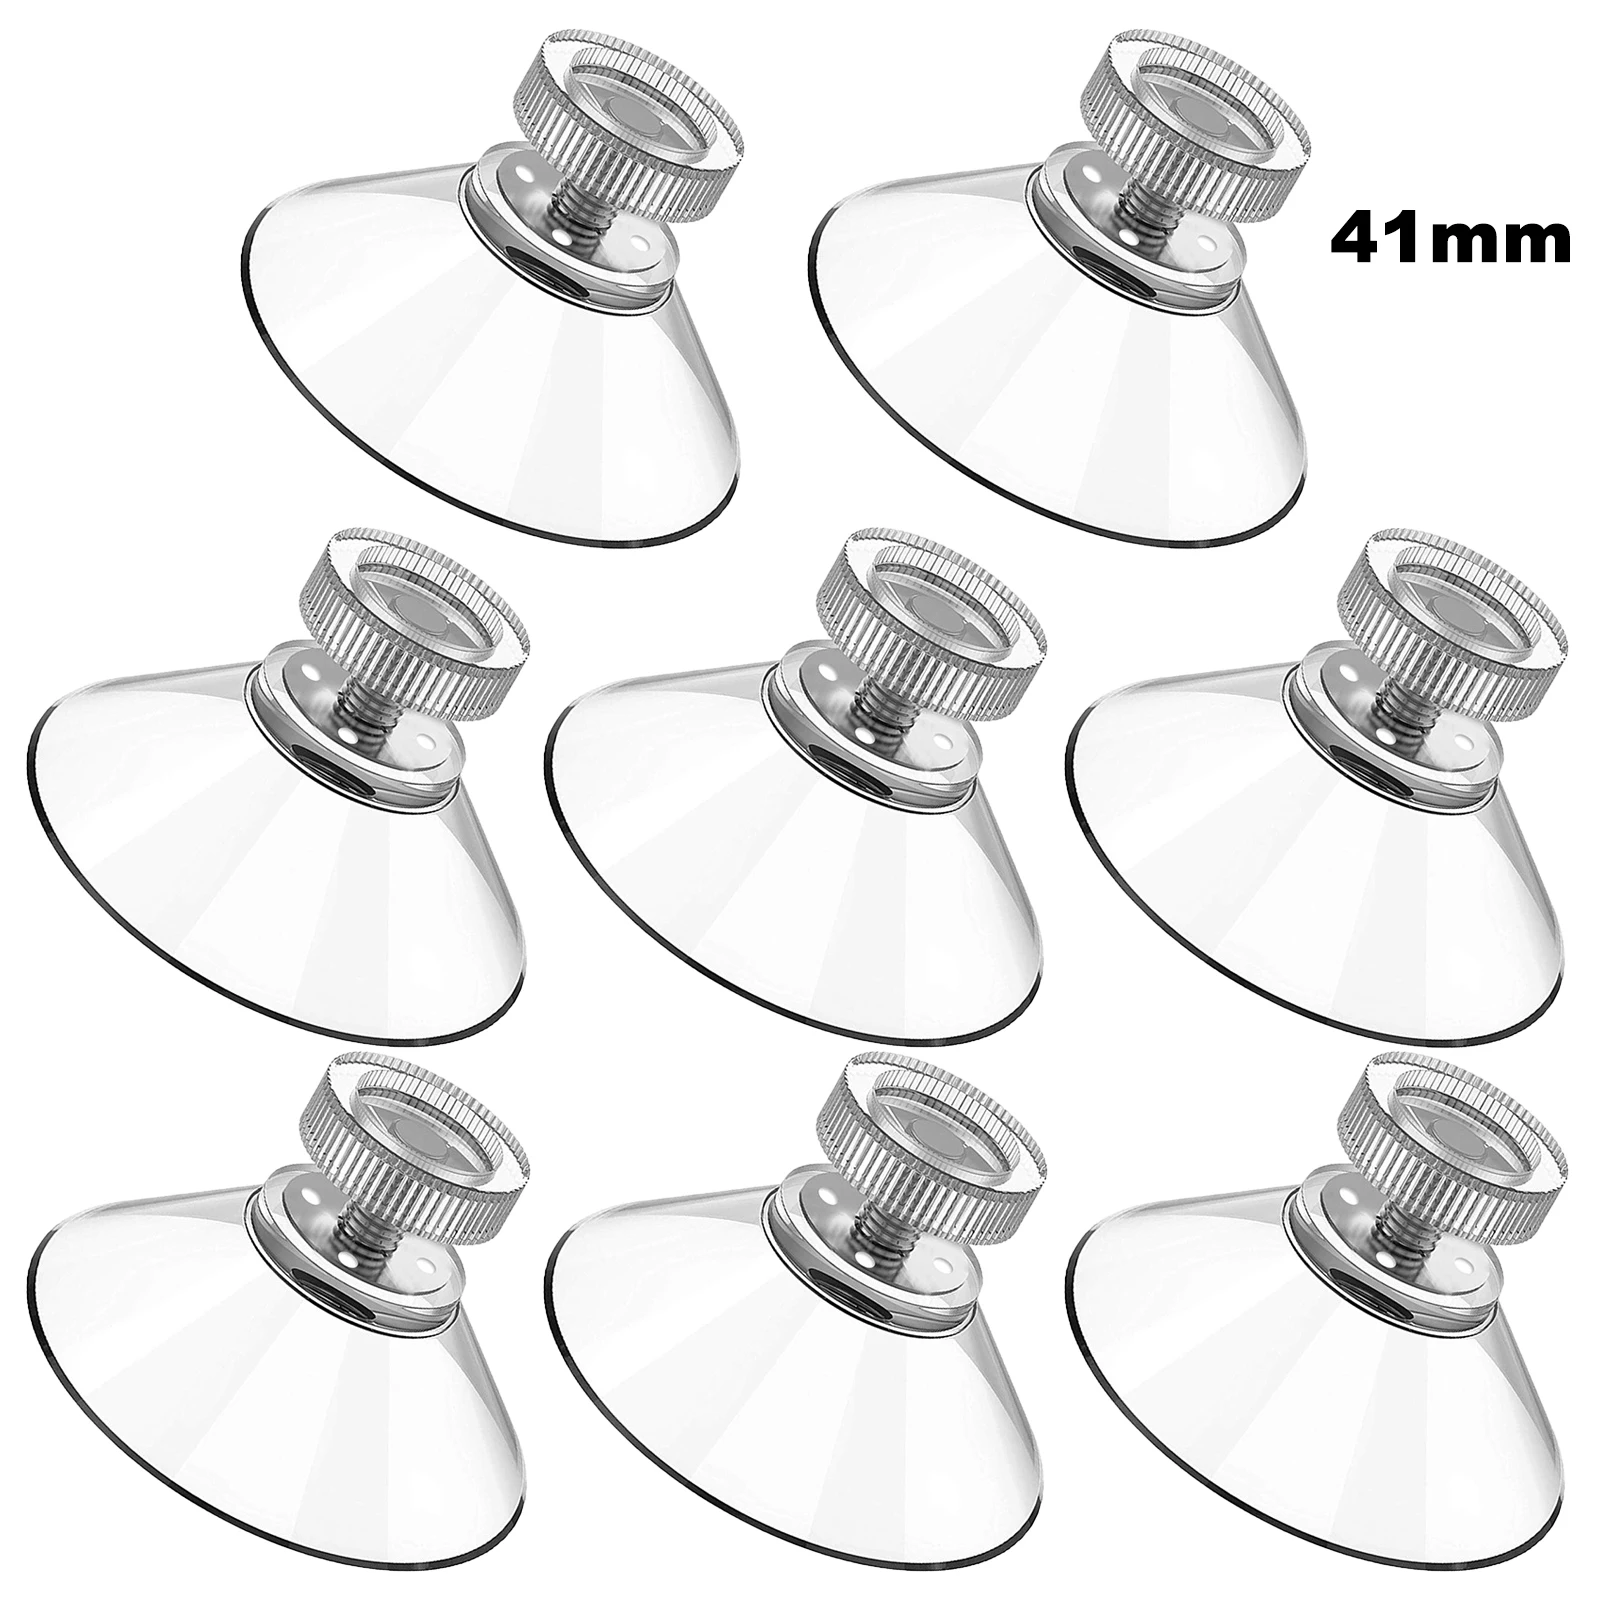 

8pcs Suction Cup Bathroom Waterproof For Glass Table Top Space Saving Mirror Reusable Towel Hook Heavy Duty Shower Clear PVC